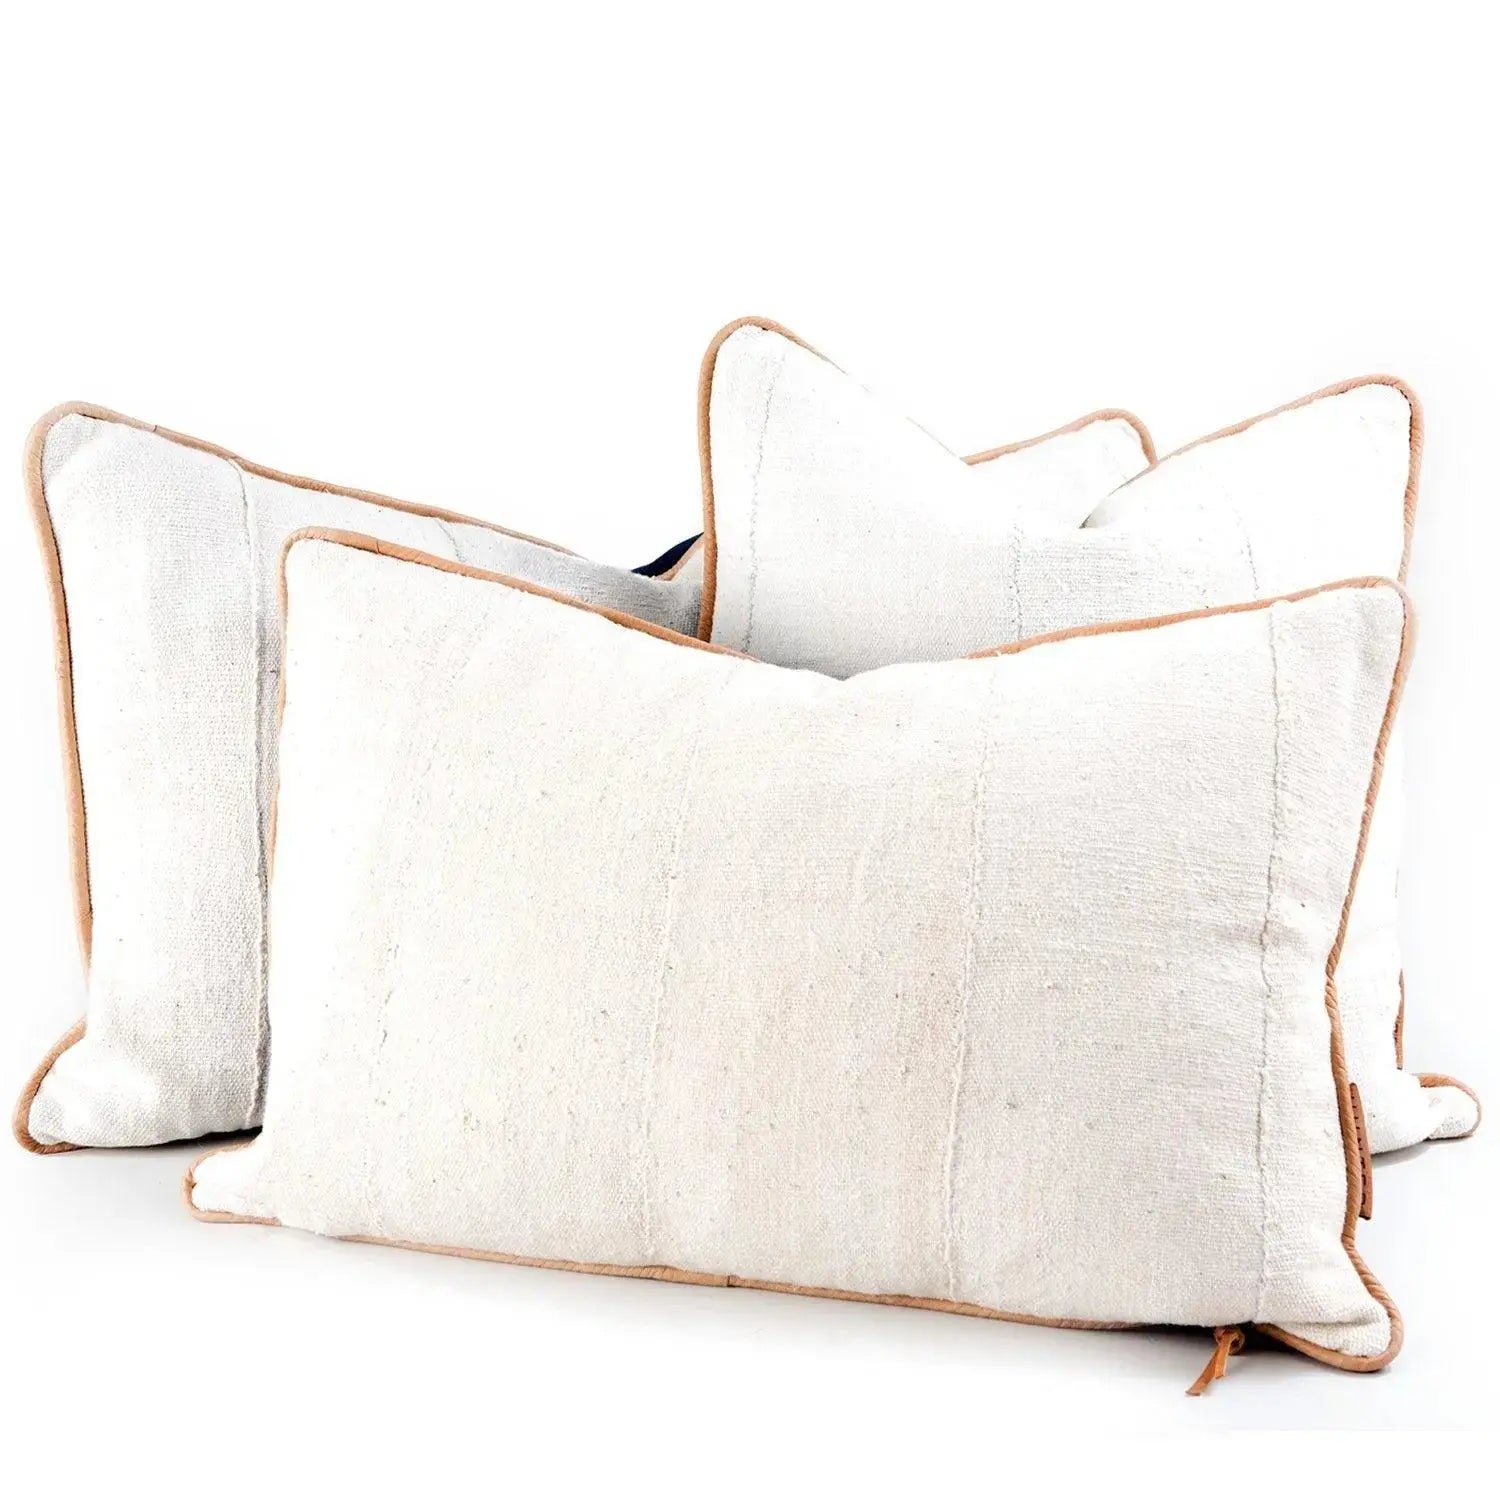 Neutral Throw Pillow With Leather - HUNTEDFOX